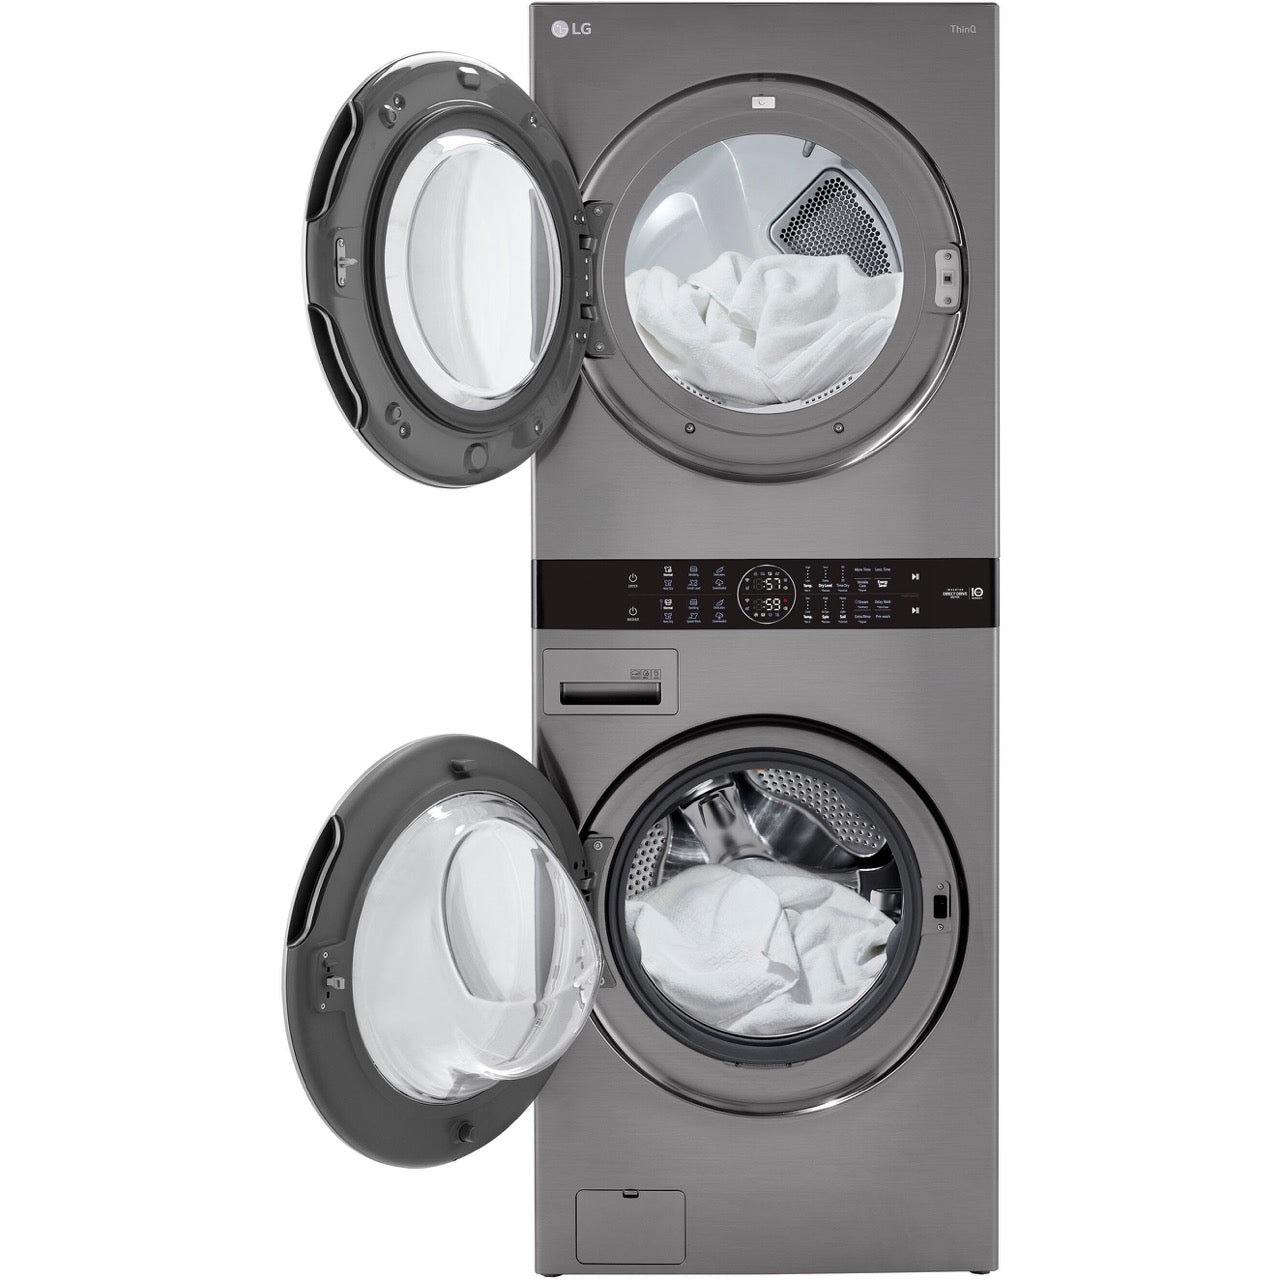 LG WashTower Single Front Load Unit with Center Control, 4.5-Cu. Ft. Washer and 7.4-Cu. Ft. Electric Dryer in Graphite (WKE100HVA)